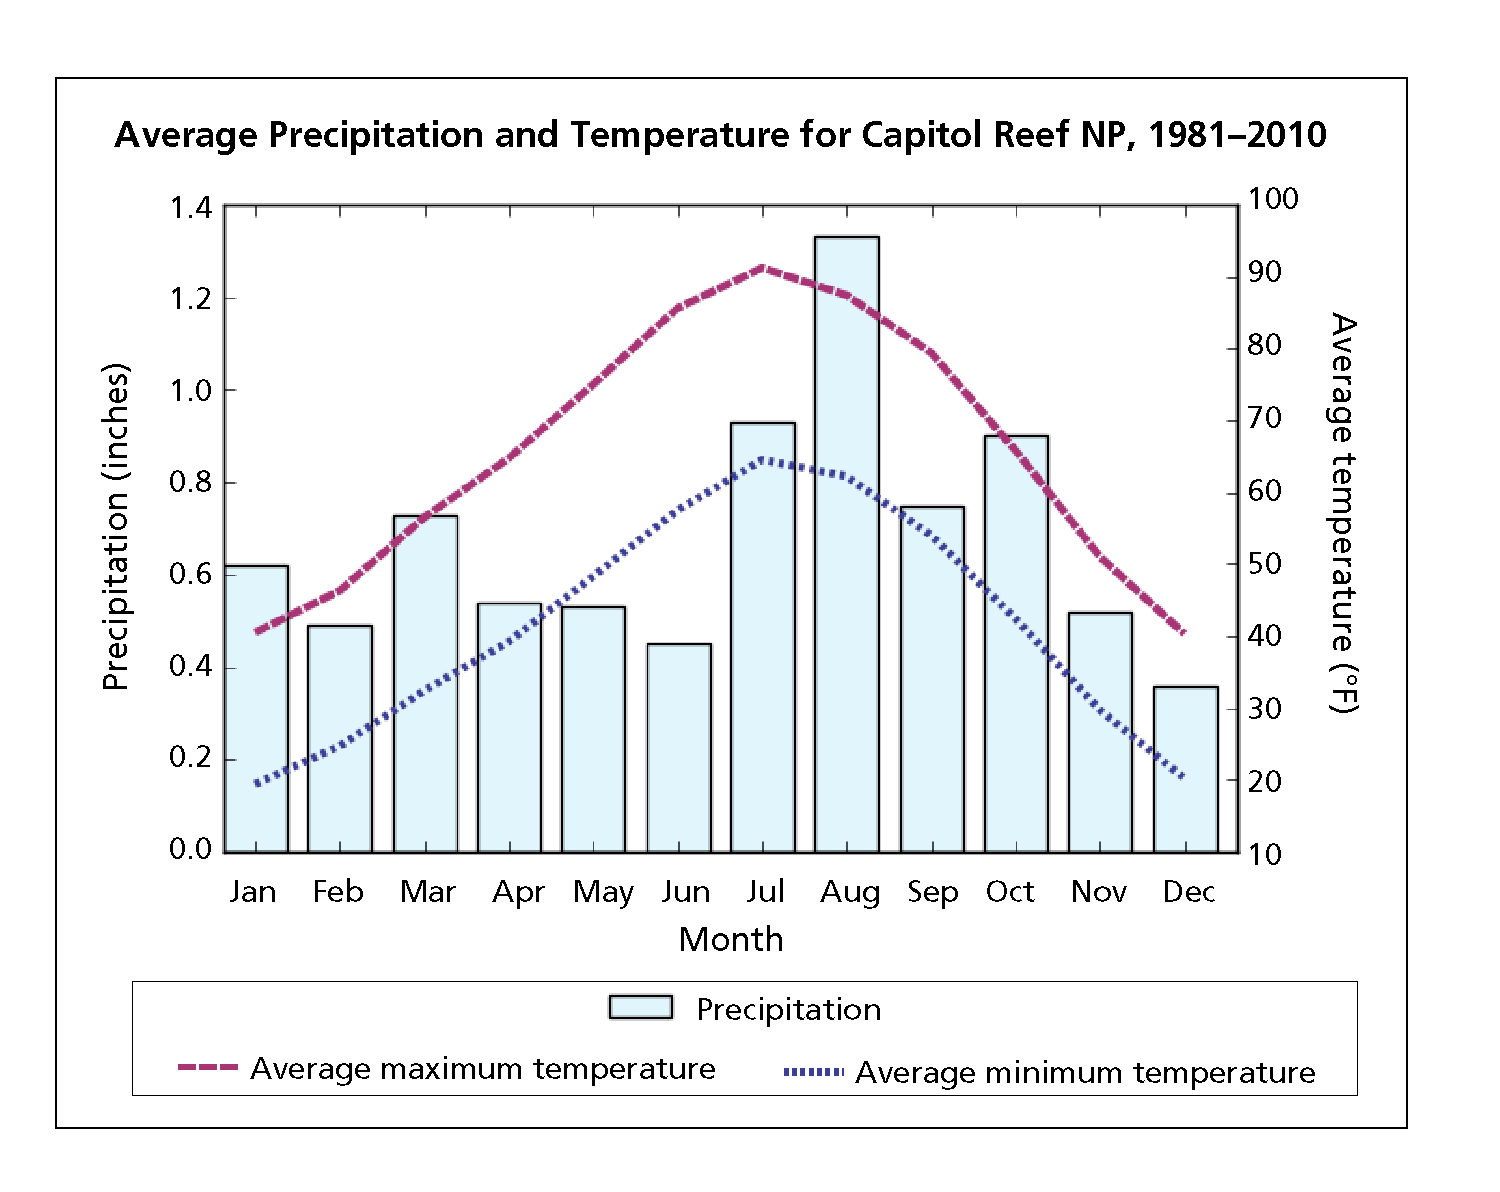 Bar and line graph showing average precipitation and temperatures for Capitol Reef NP, 1981-2010. Precipitation ranges from ~0.4 inches in December to <1.4 inches in August. Average maximum temperature ranges from ~40 degrees F in December to ~90 degrees F in July. Average minimum temperature ranges from ~20 degrees F in December to ~65 degrees F in July.